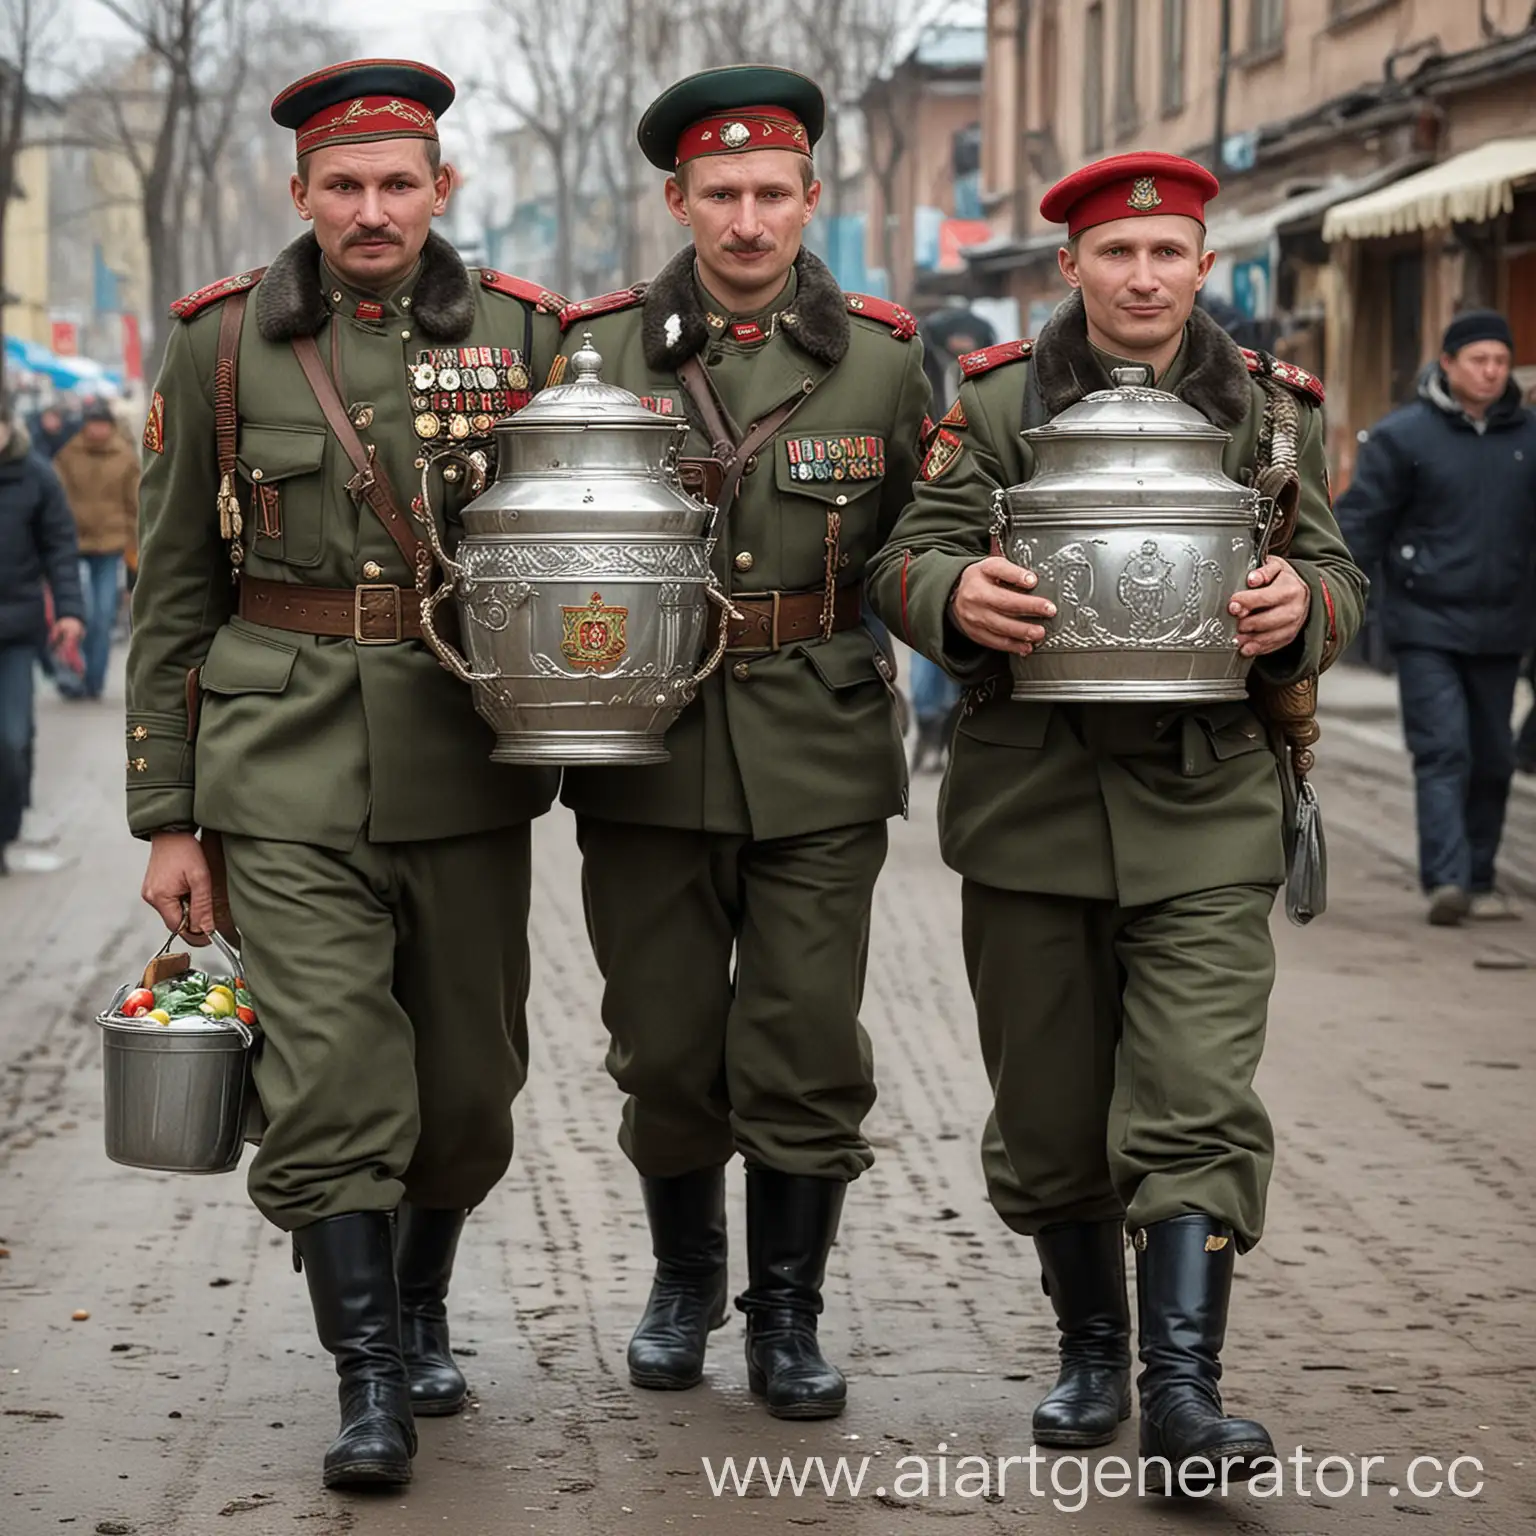 Funny Russian soldiers carry a samovar to the market